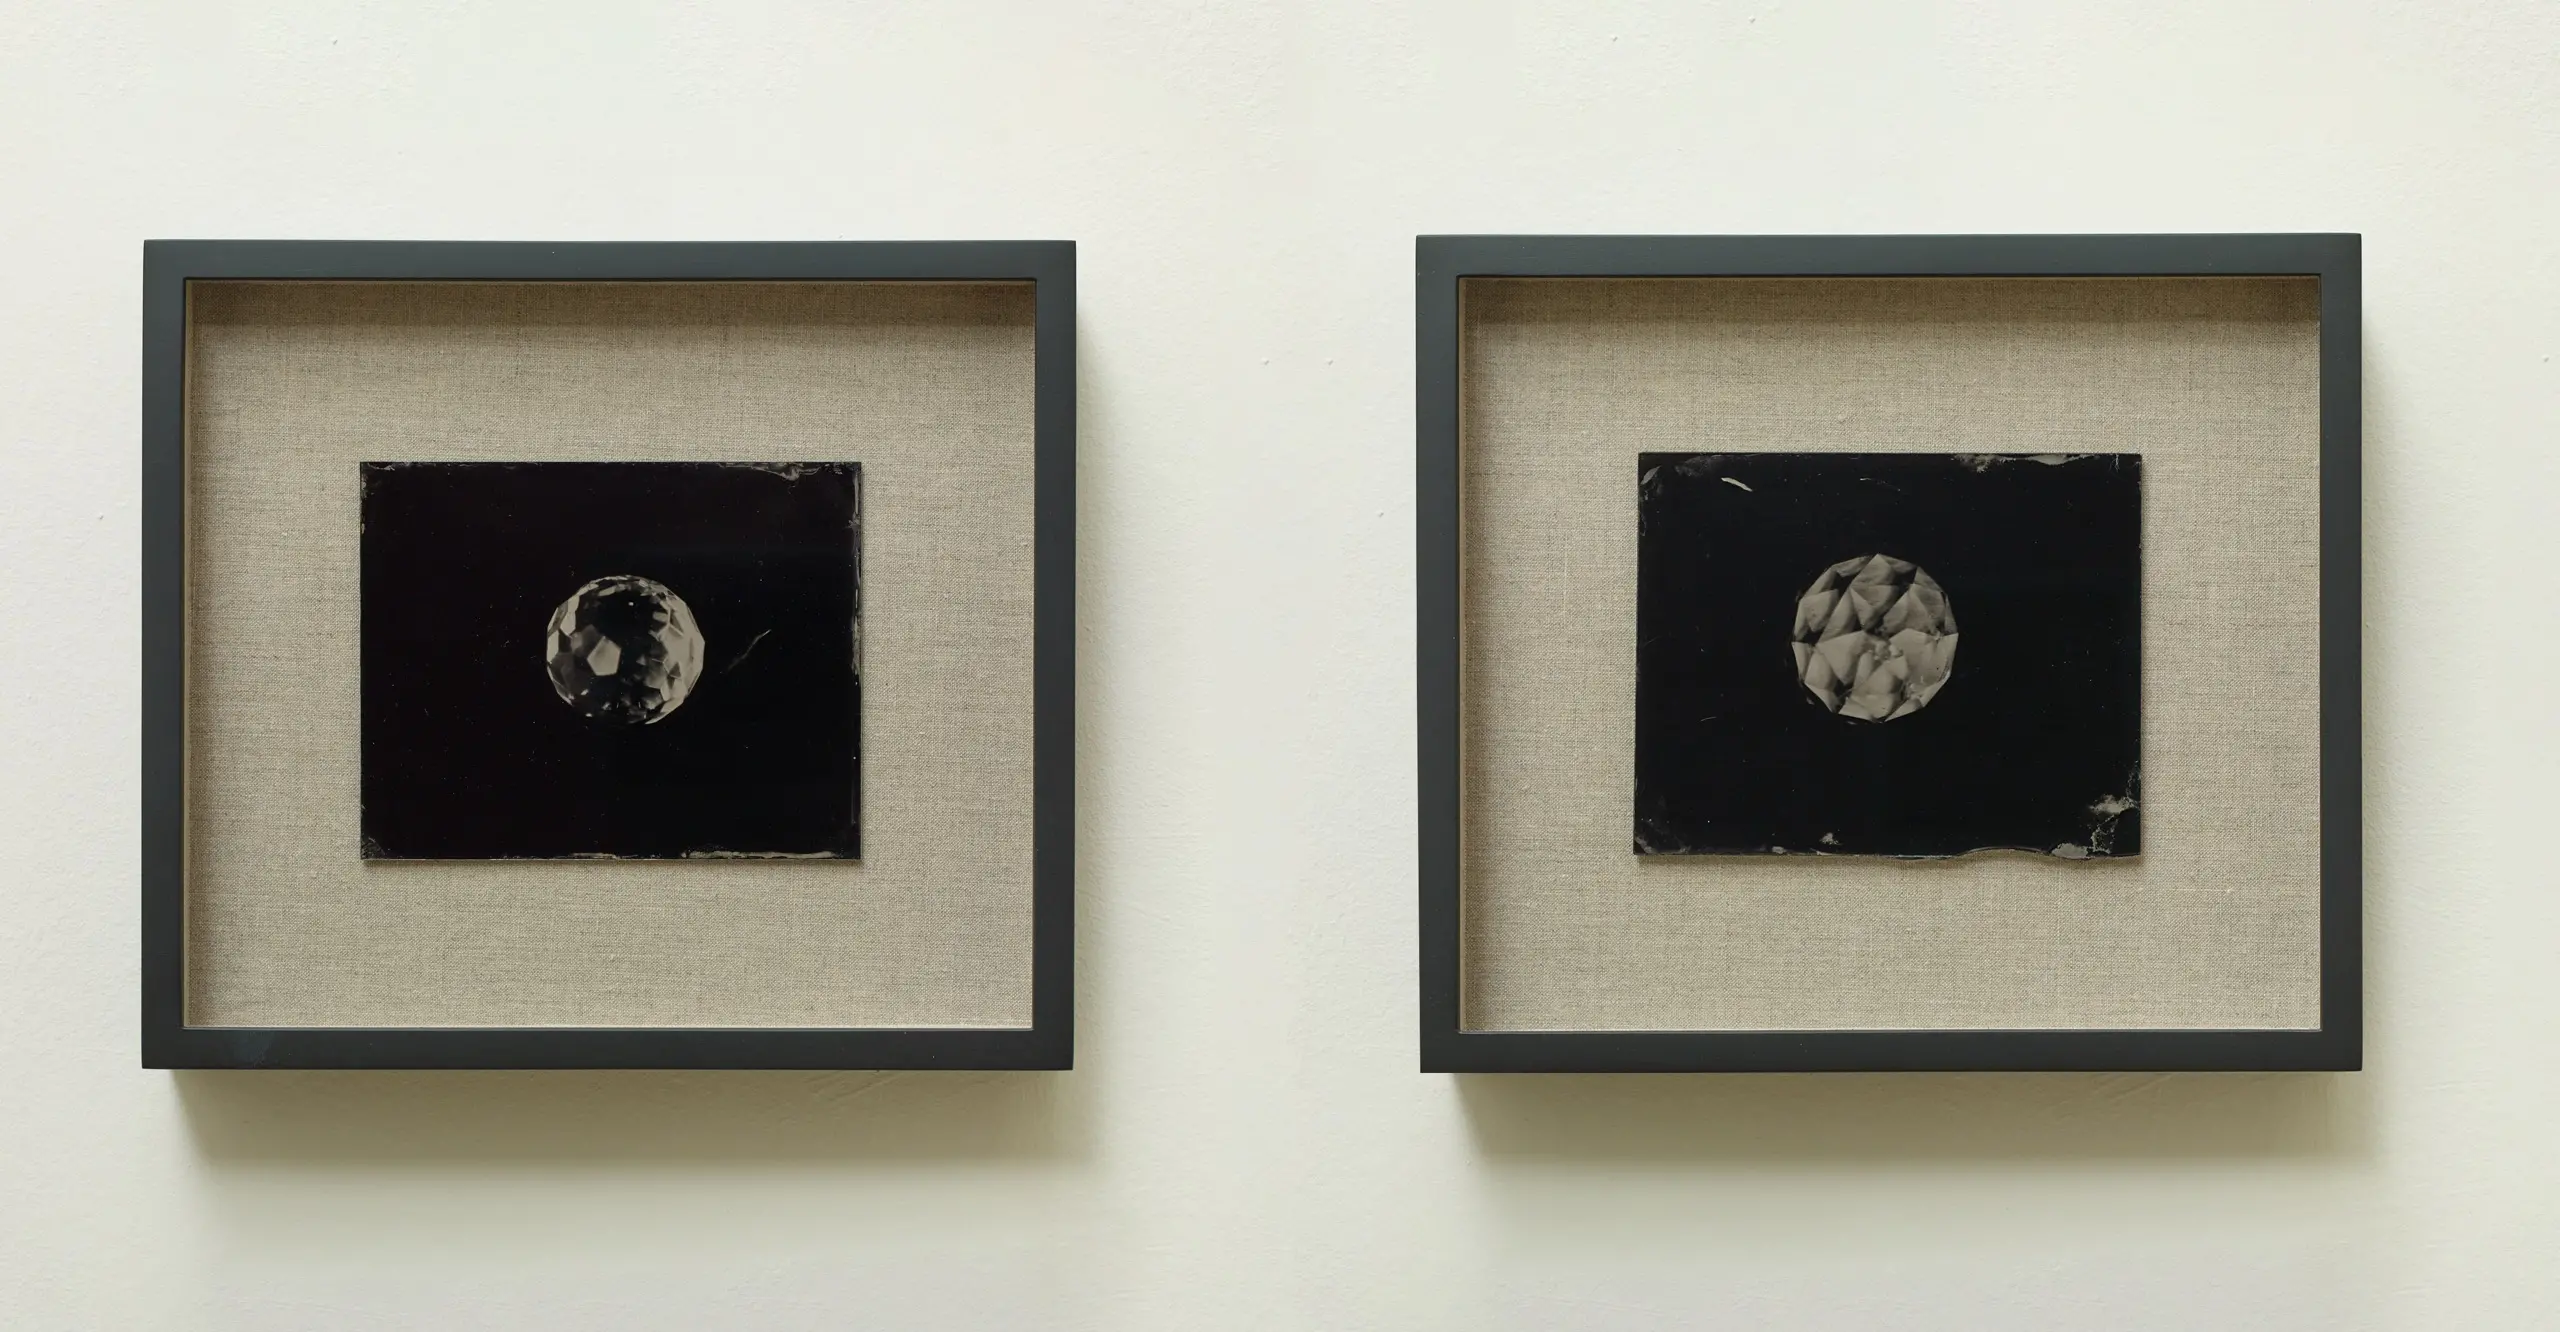 Install shot of two framed photographs of objects in space